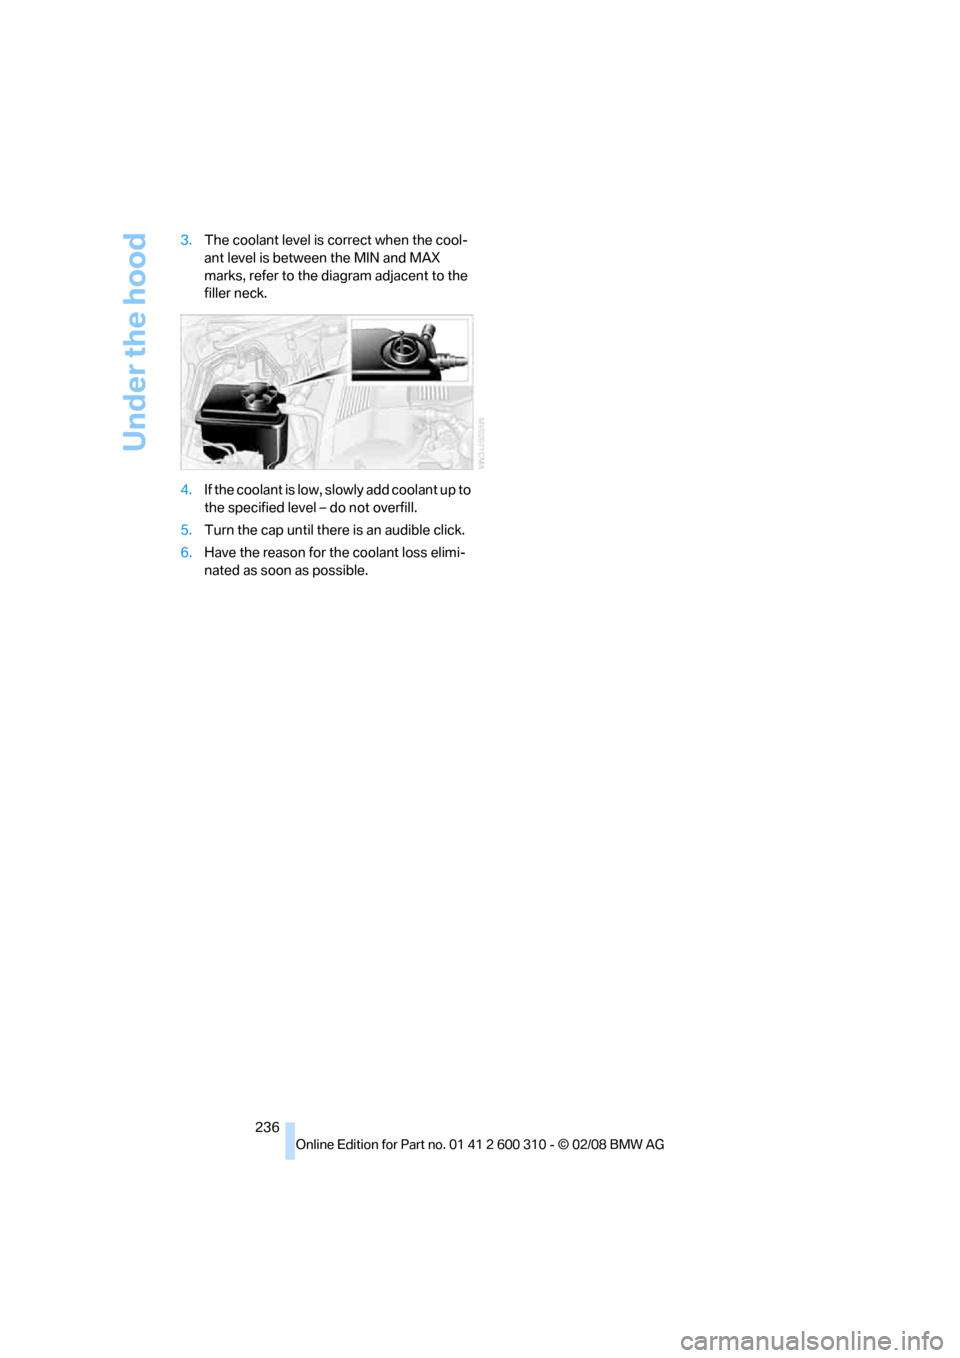 BMW 525I TOURING 2008 E61 Owners Manual Under the hood
236 3.The coolant level is correct when the cool-
ant level is between the MIN and MAX 
marks, refer to the diagram adjacent to the 
filler neck.
4.If the coolant is low, slowly add coo